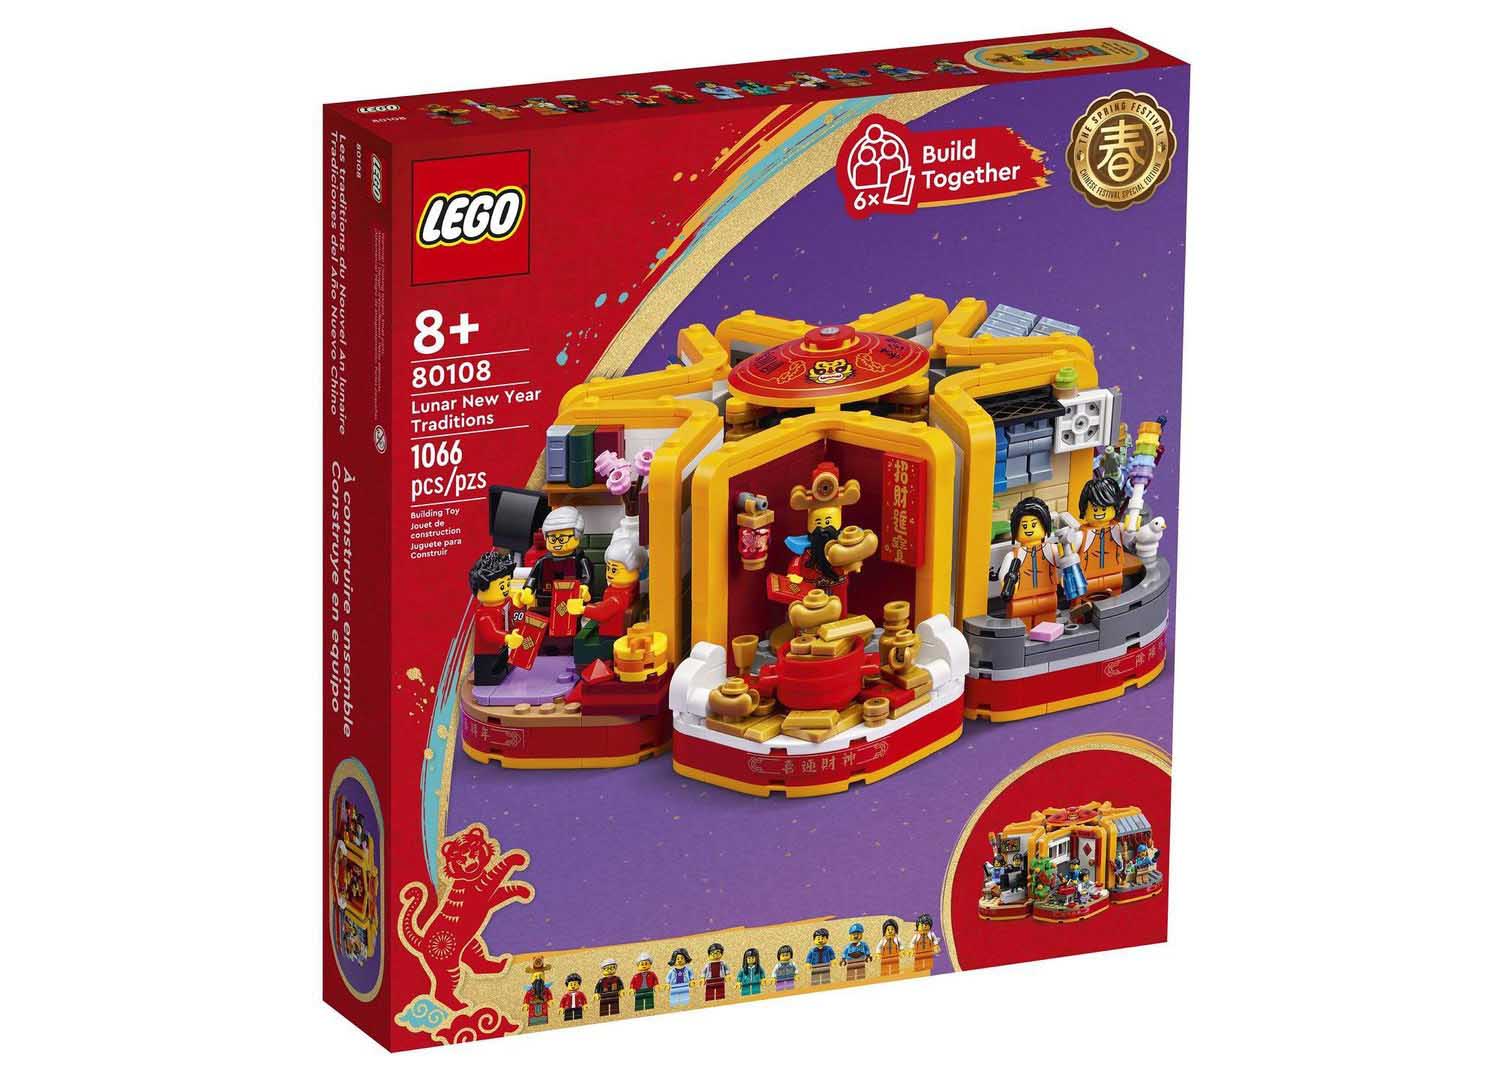 LEGO Chinese New Year Temple Fair Set 80105 - US